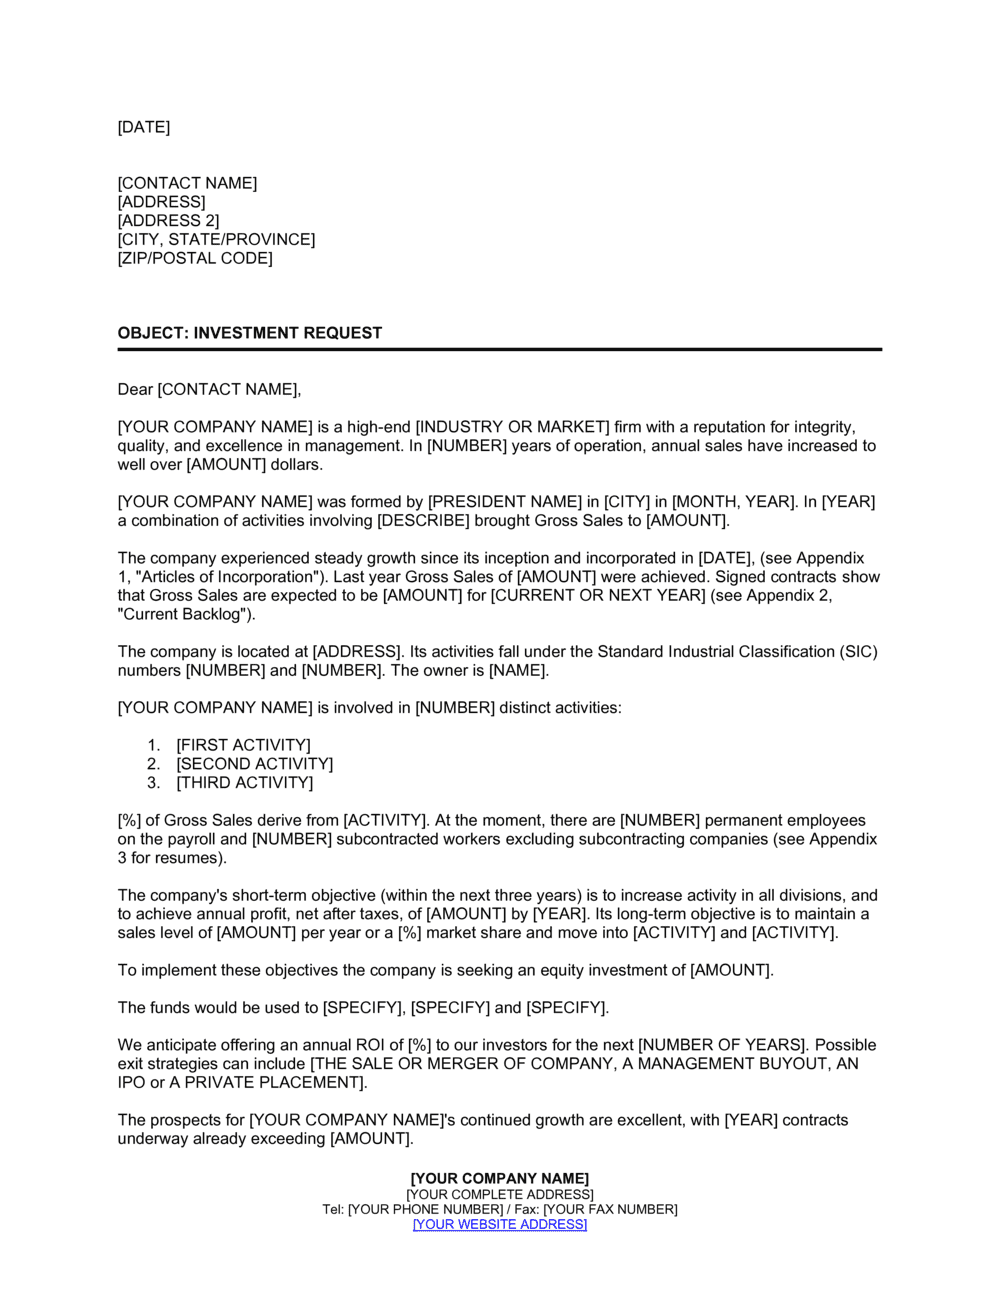 Investment Proposal Letter from templates.business-in-a-box.com